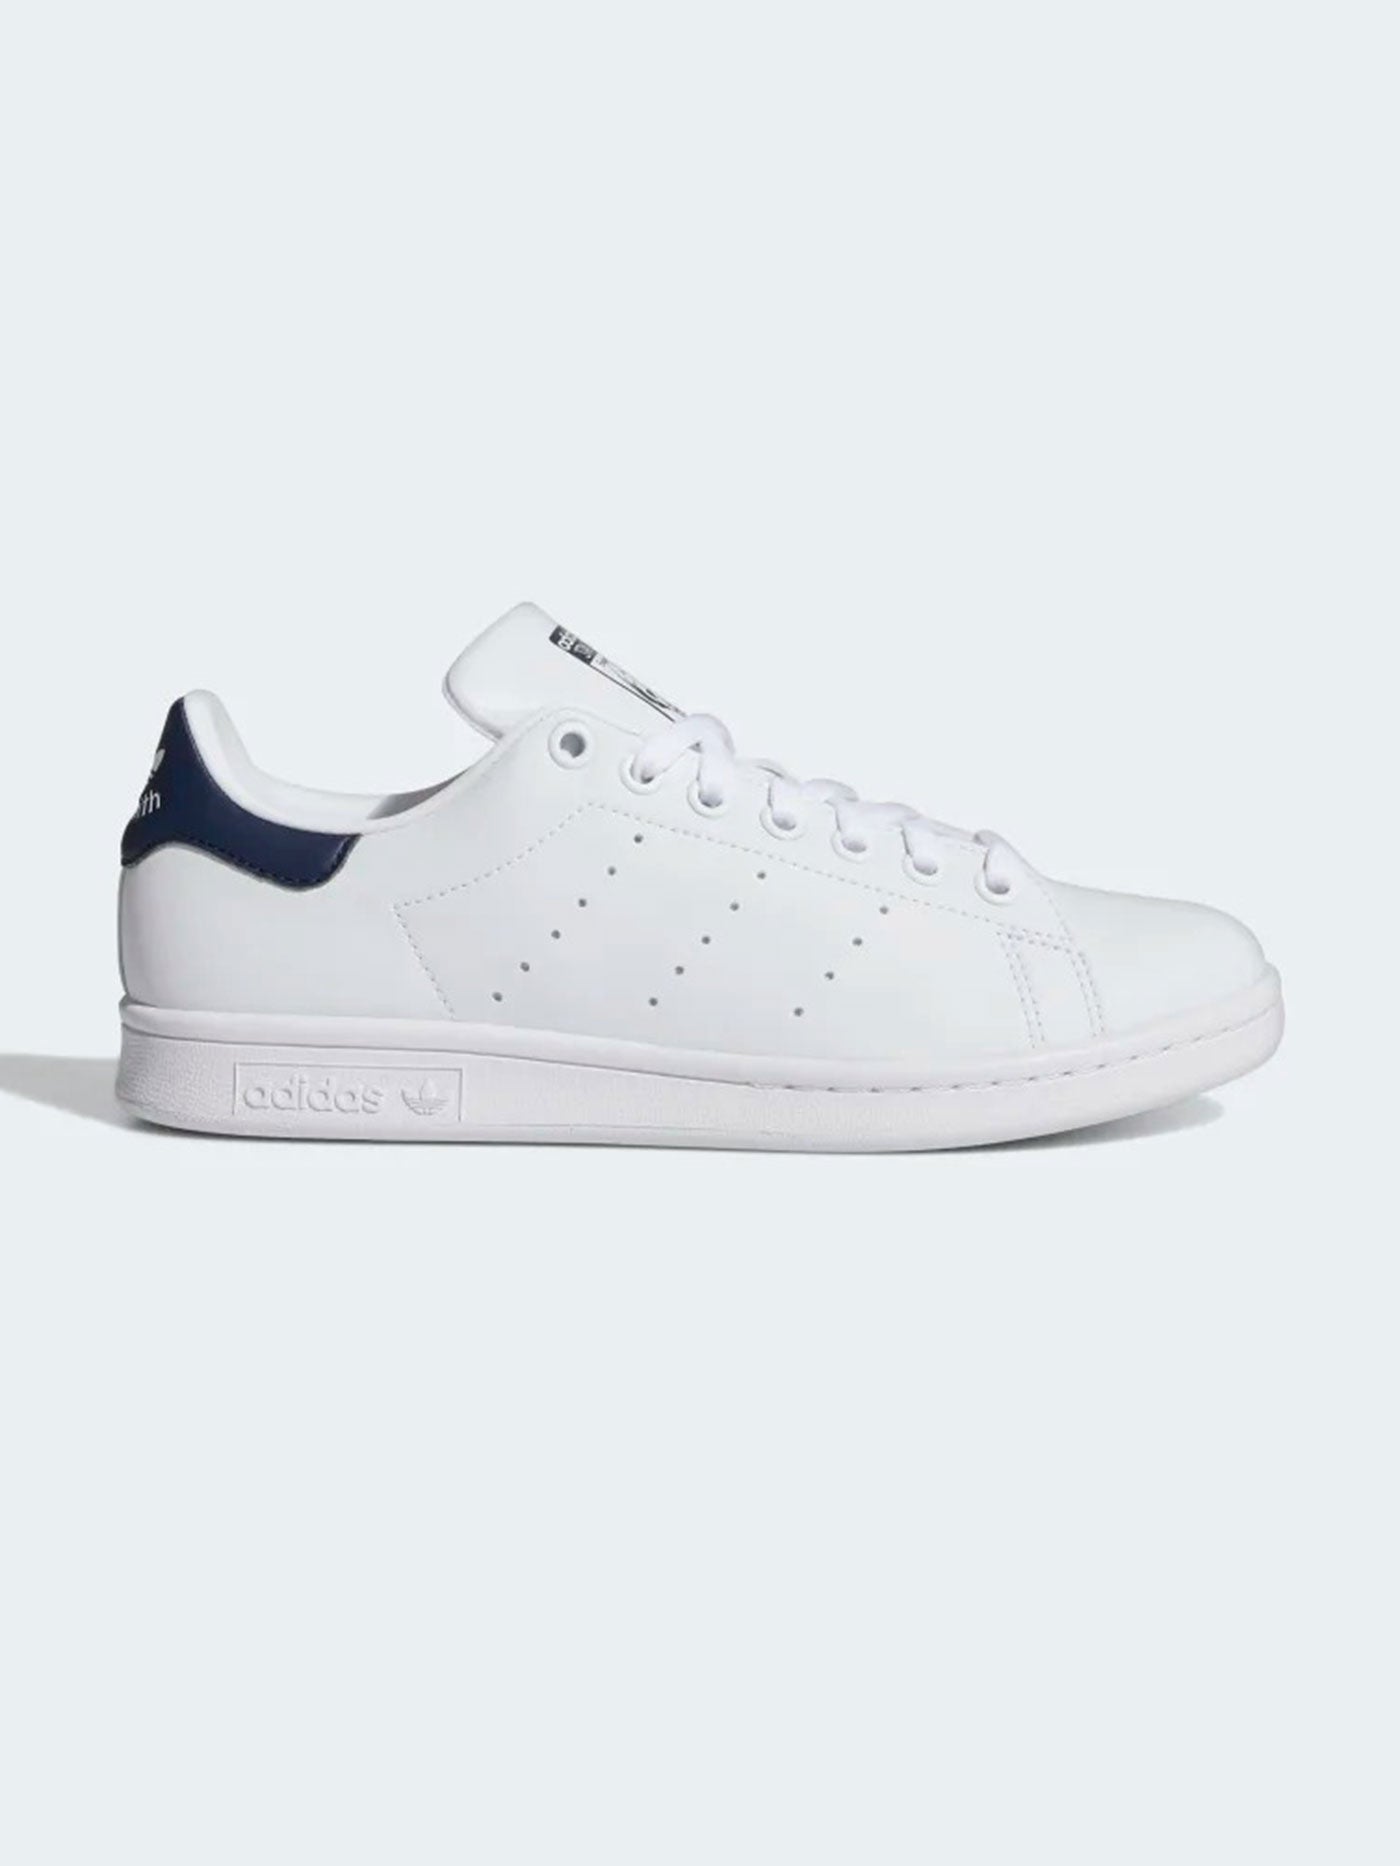 Adidas Stan Smith FTWWHT/CONAVY/FTWWHT Shoes